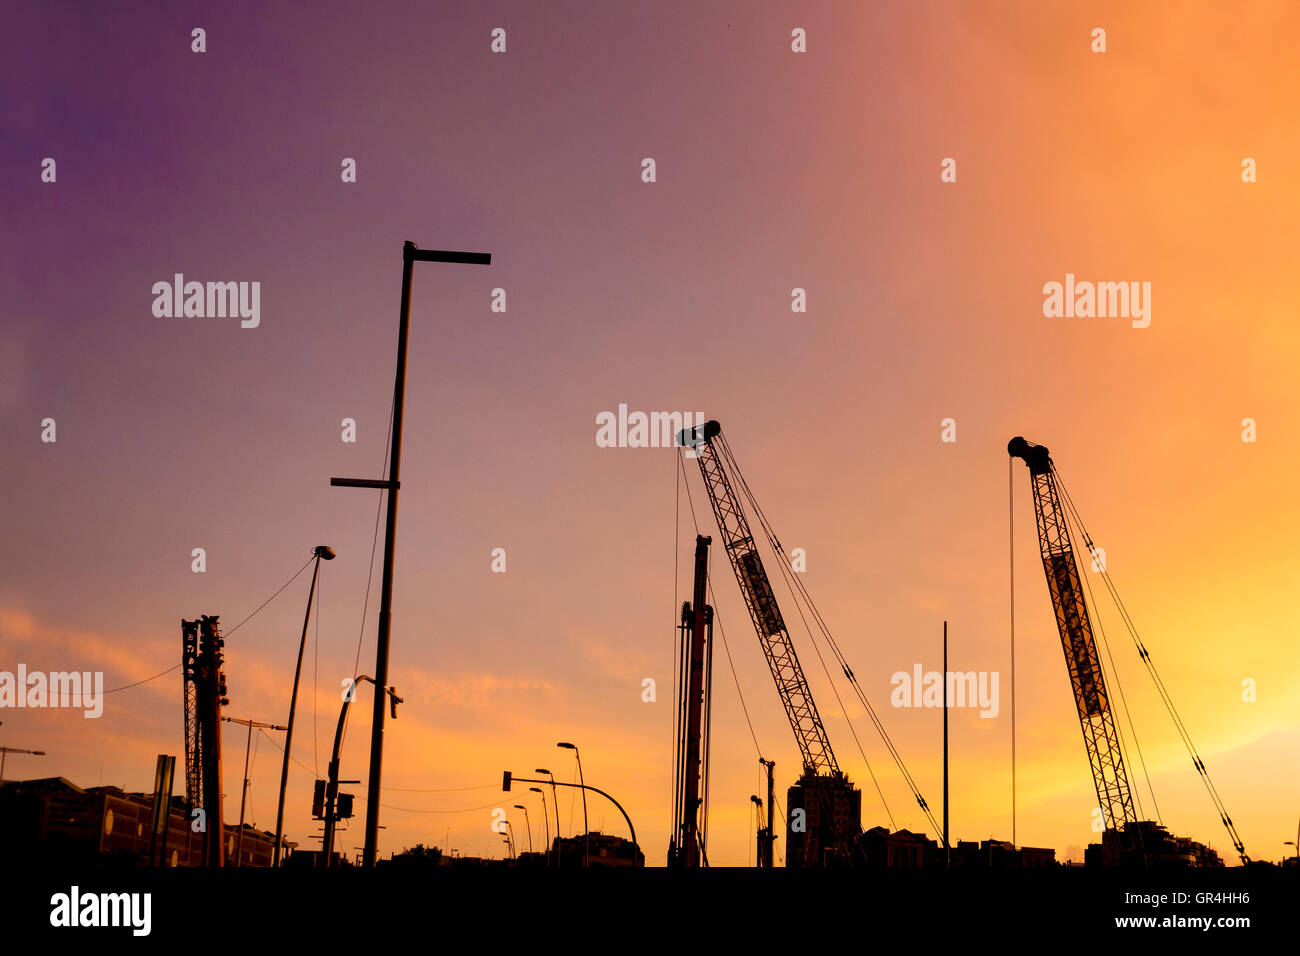 Cranes silhouettes of subway line over colorful sunset sky Stock Photo